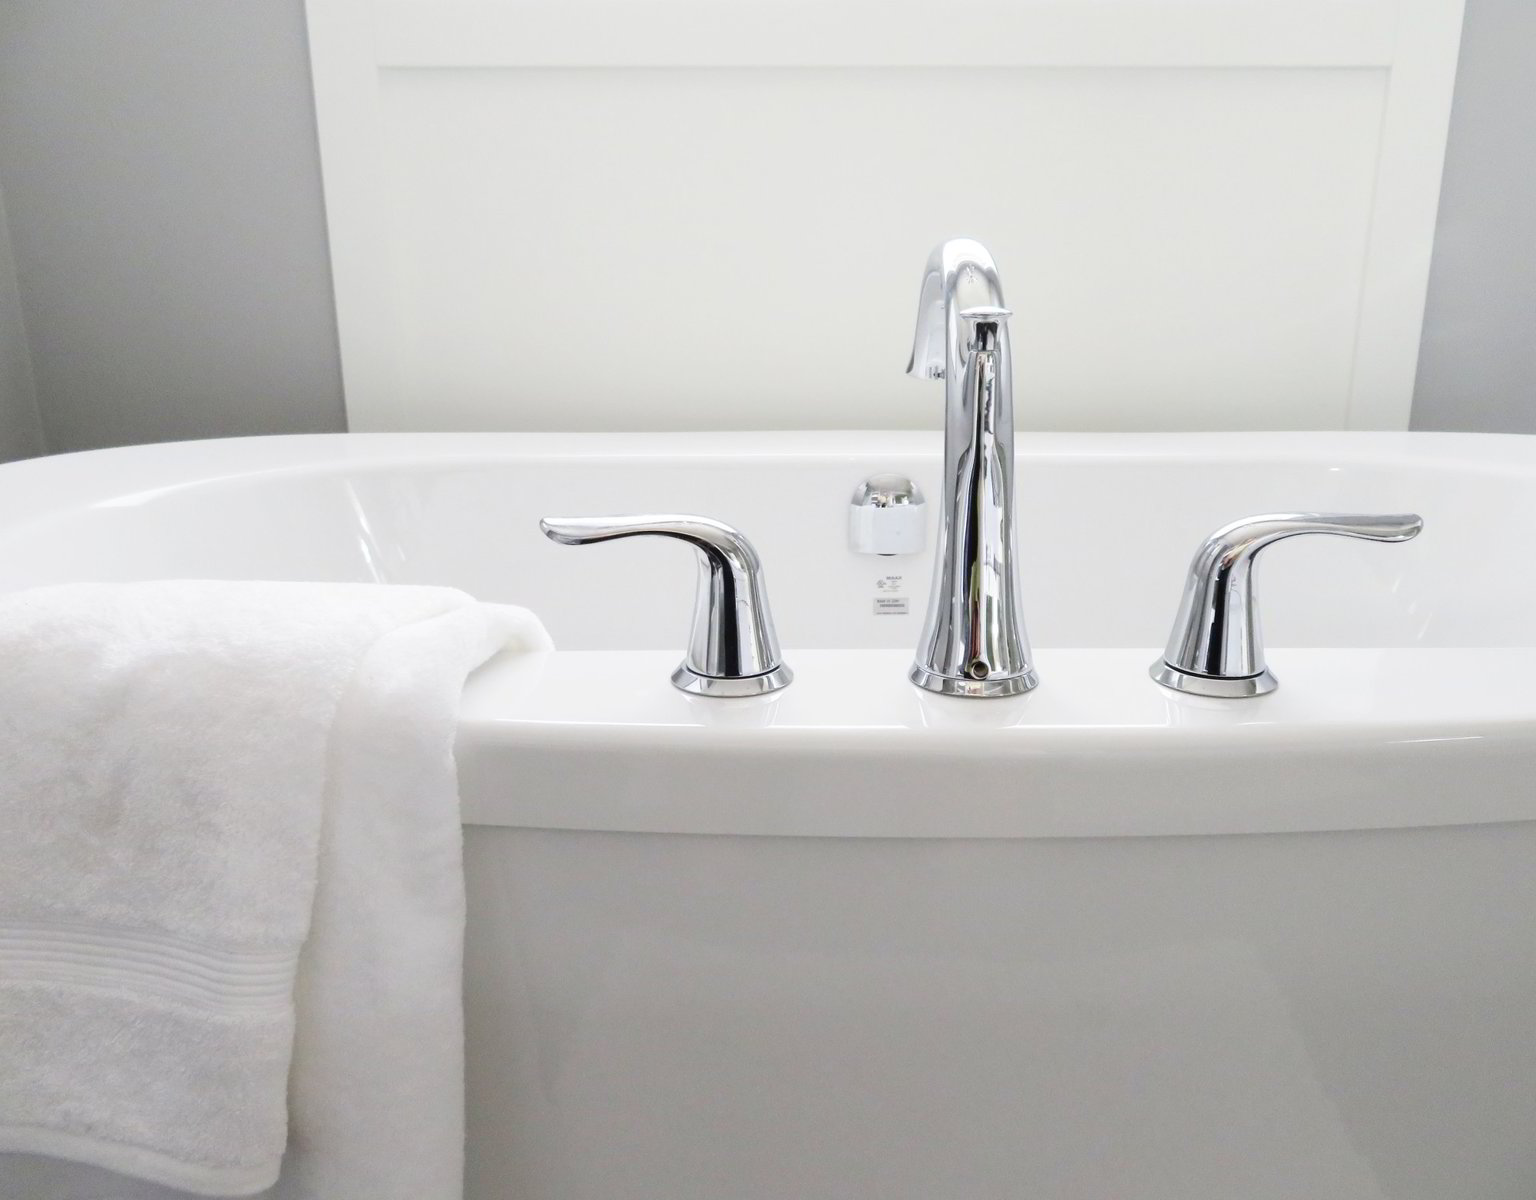 How To Fix A Leaky Bathtub Faucet, How To Remove Stem From Bathtub Faucet